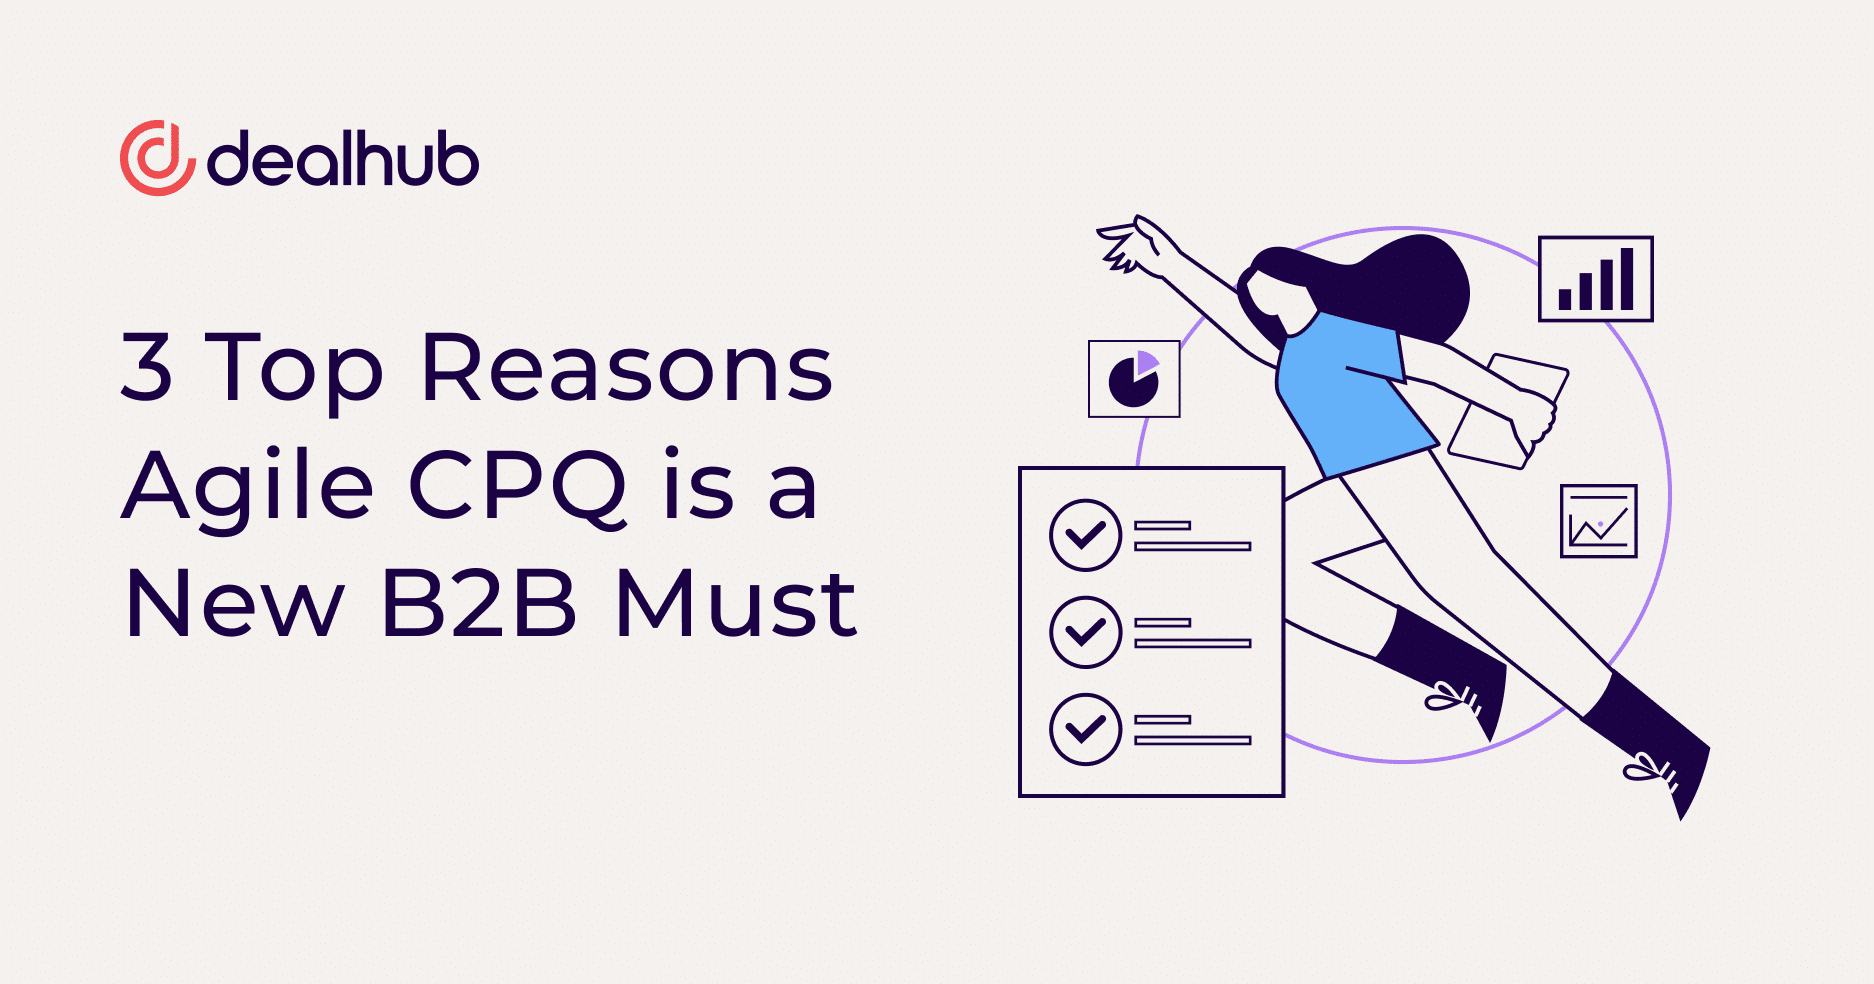 3 Top Reasons Agile CPQ is a New B2B Must